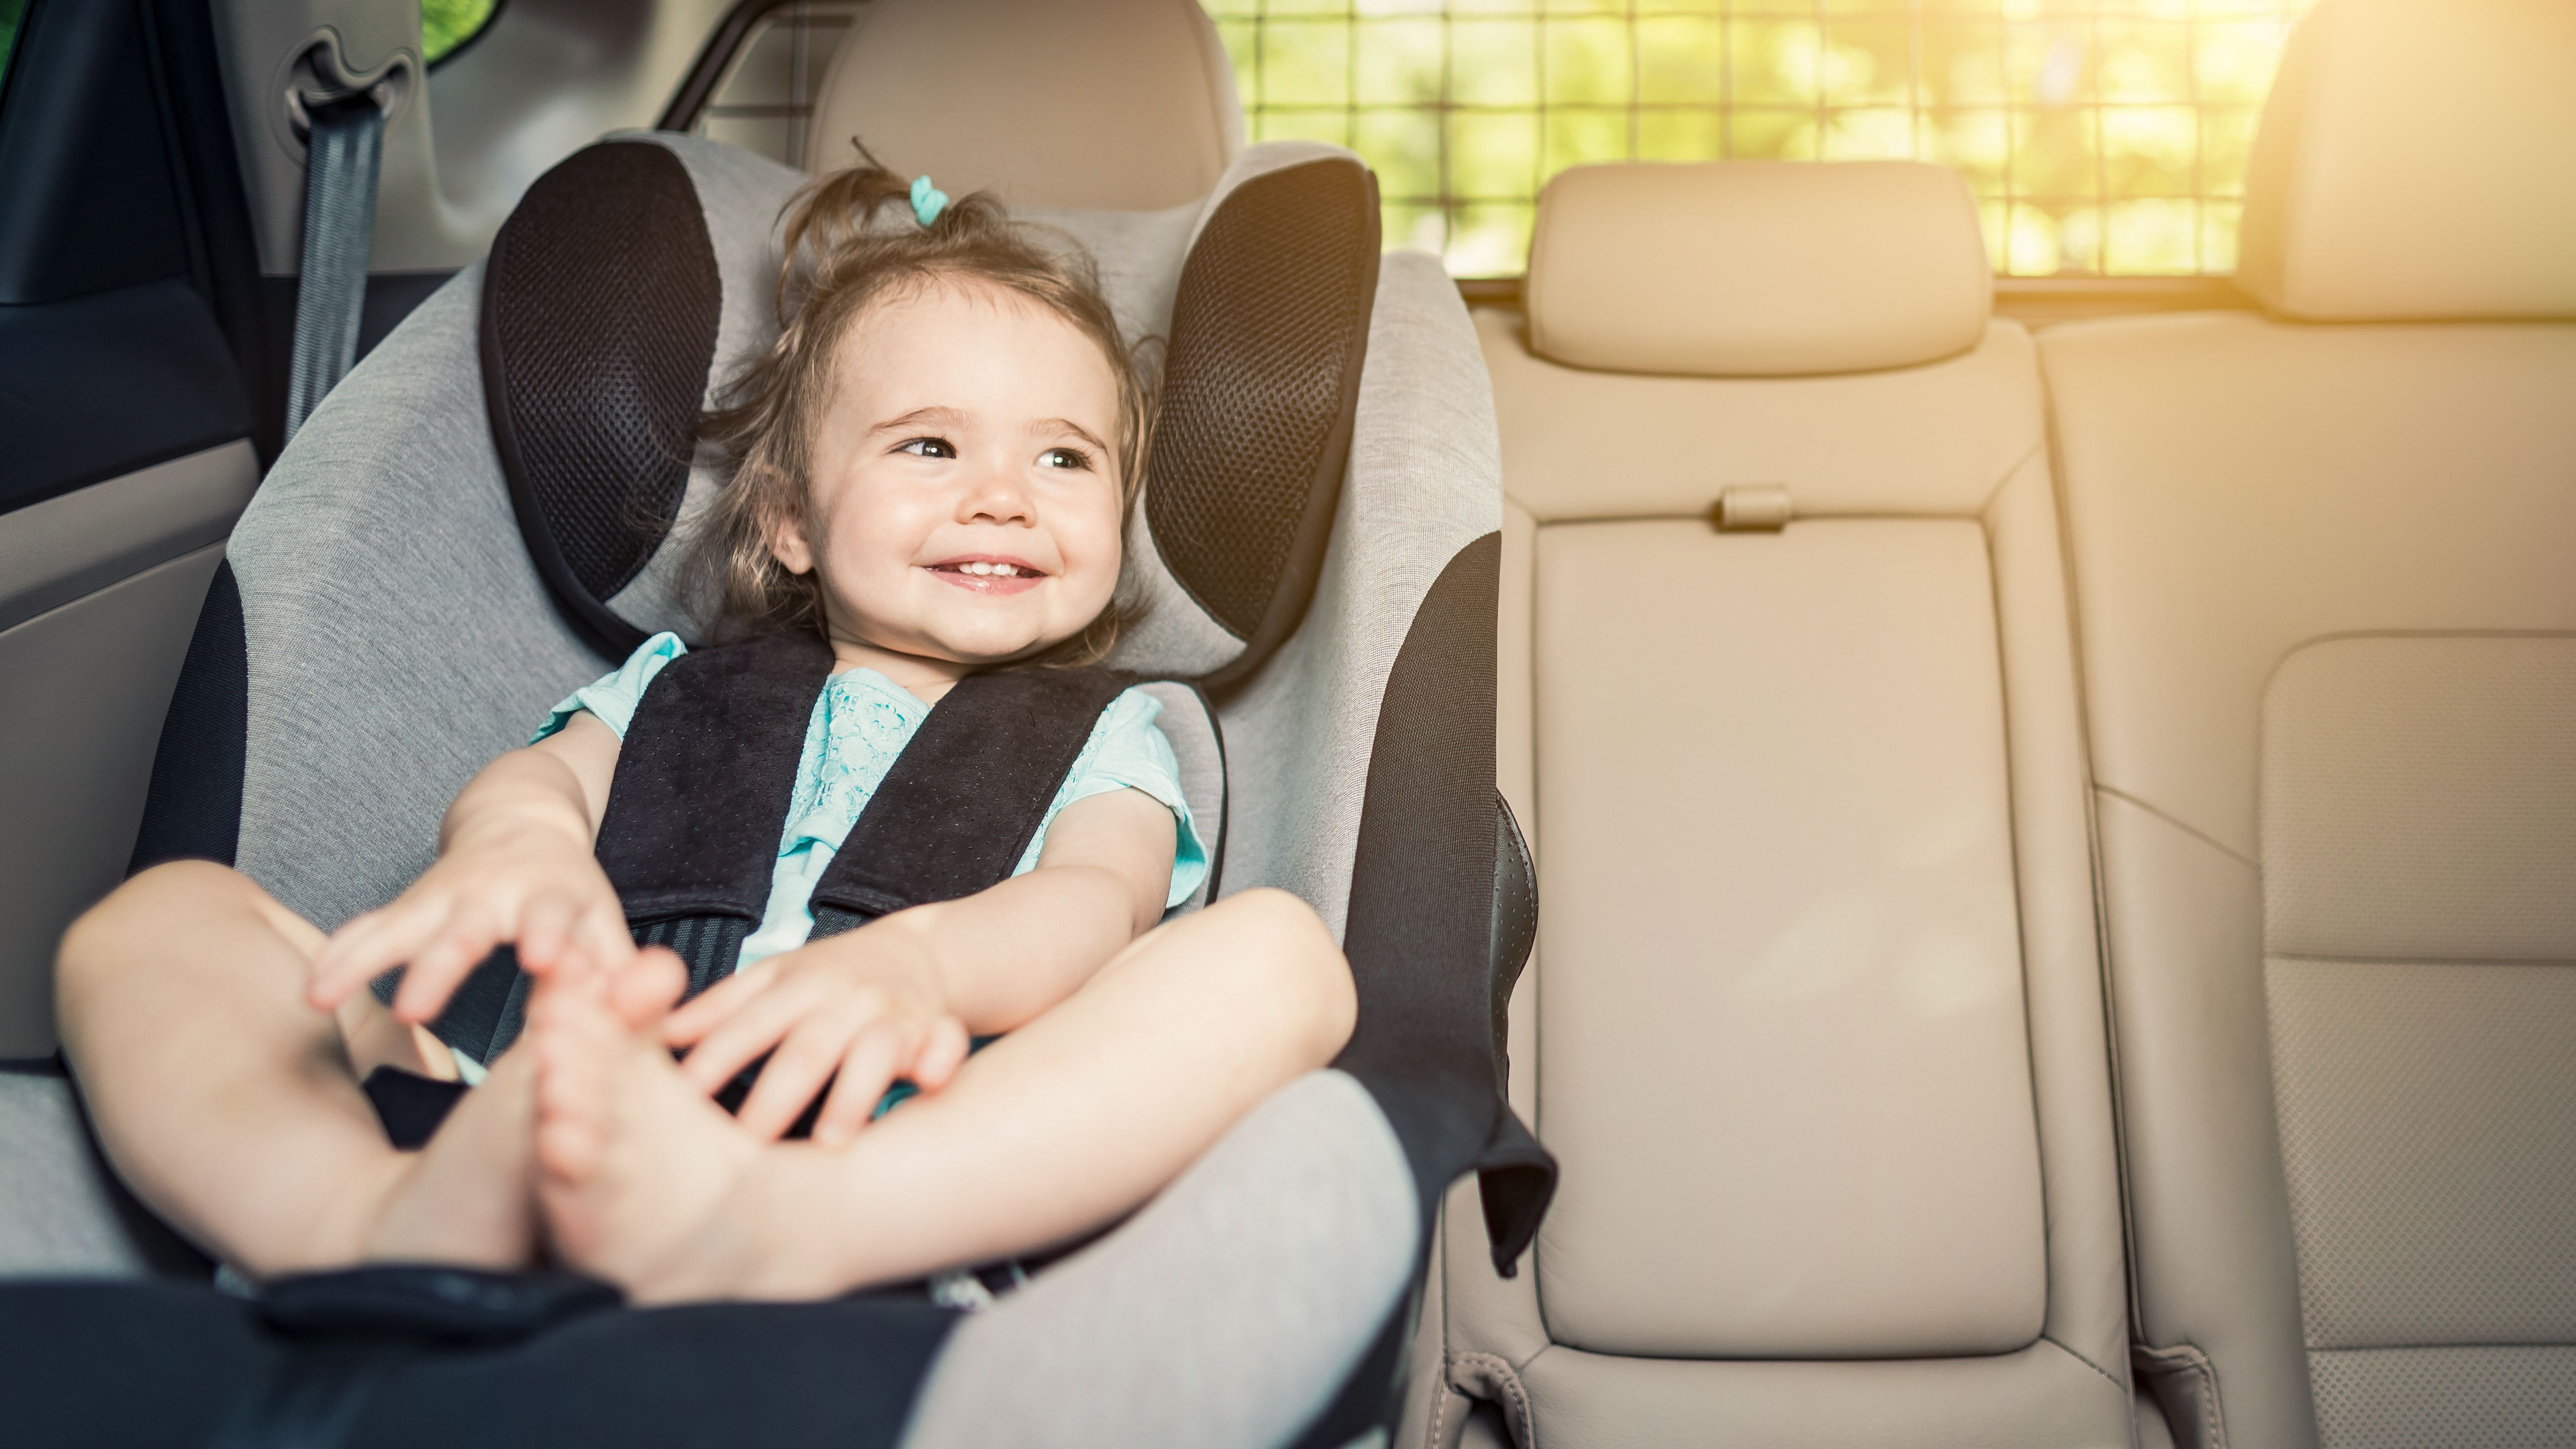 Car Seat Recycling Events, Where Can I Dispose Of Child Car Seats